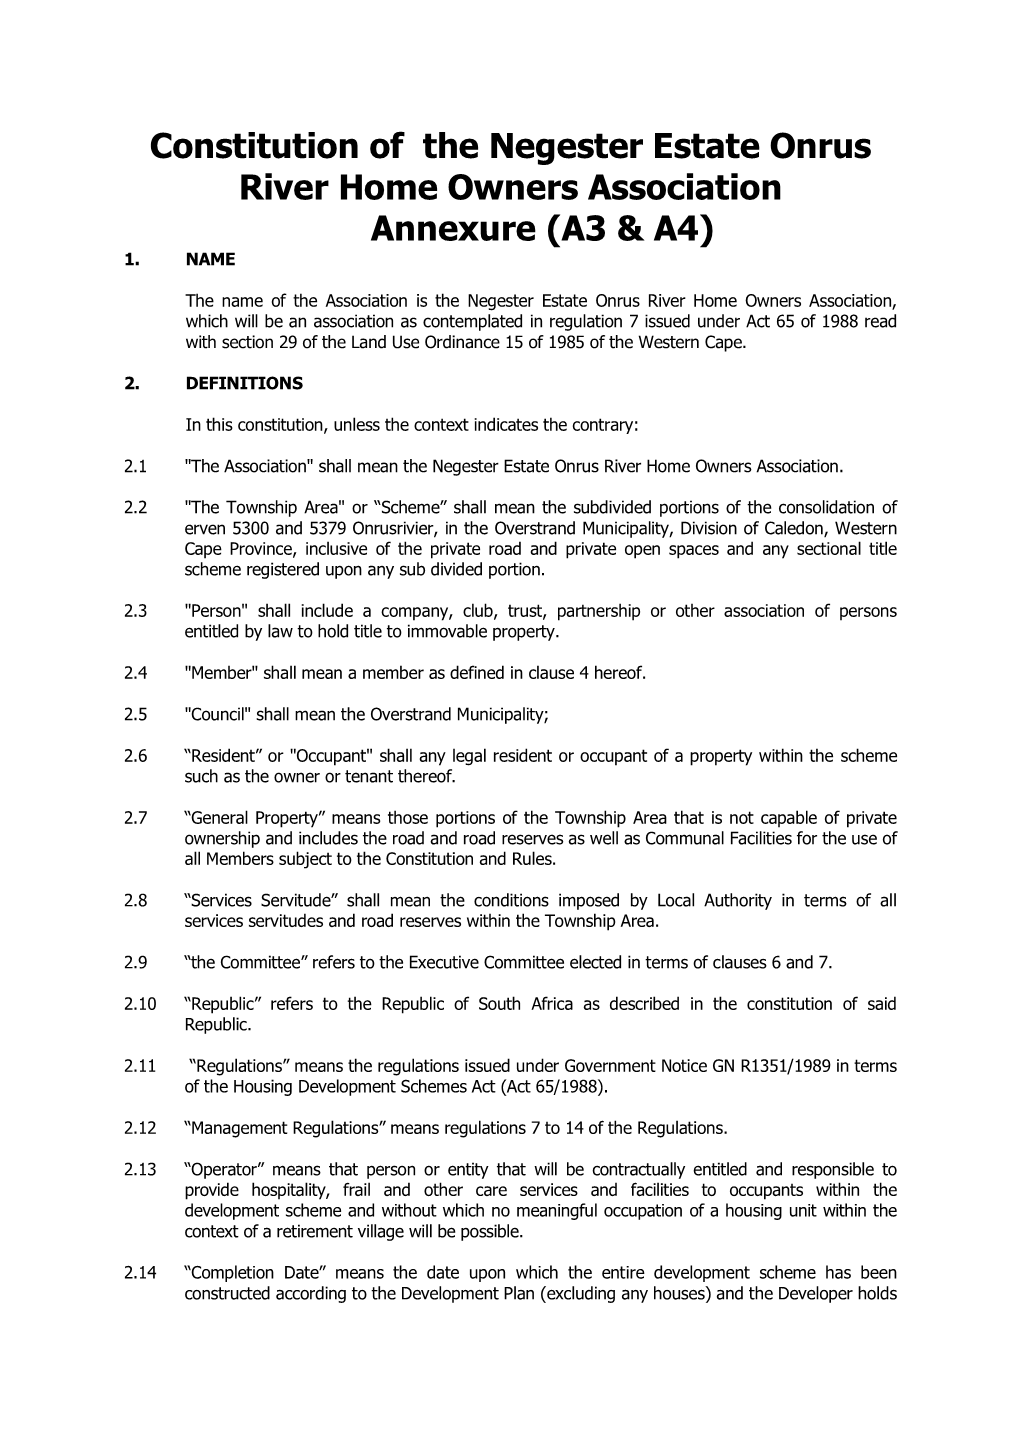 Constitution of the Negester Estate Onrus River Home Owners Association Annexure (A3 & A4) 1